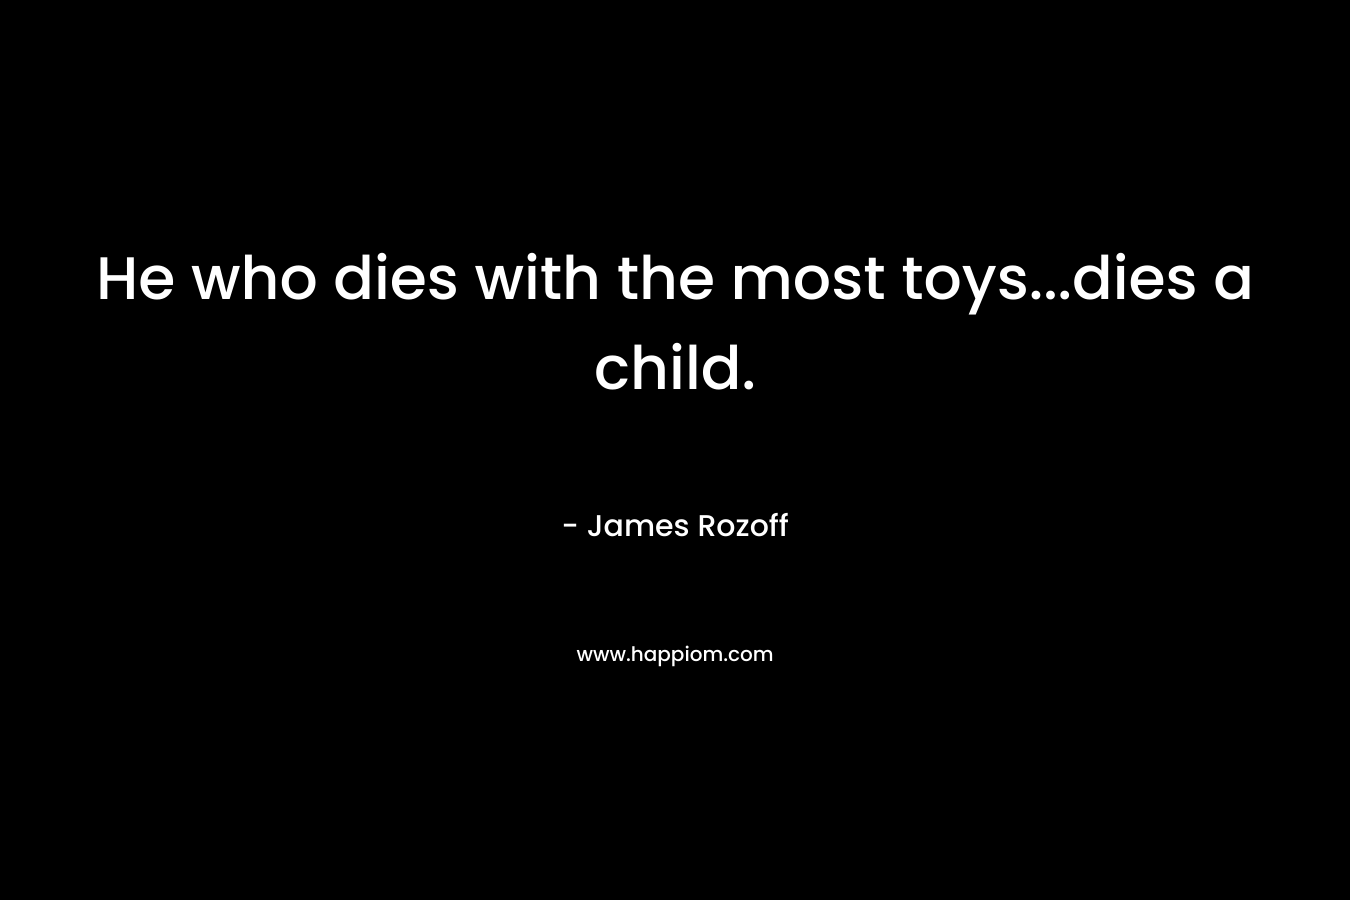 He who dies with the most toys...dies a child.